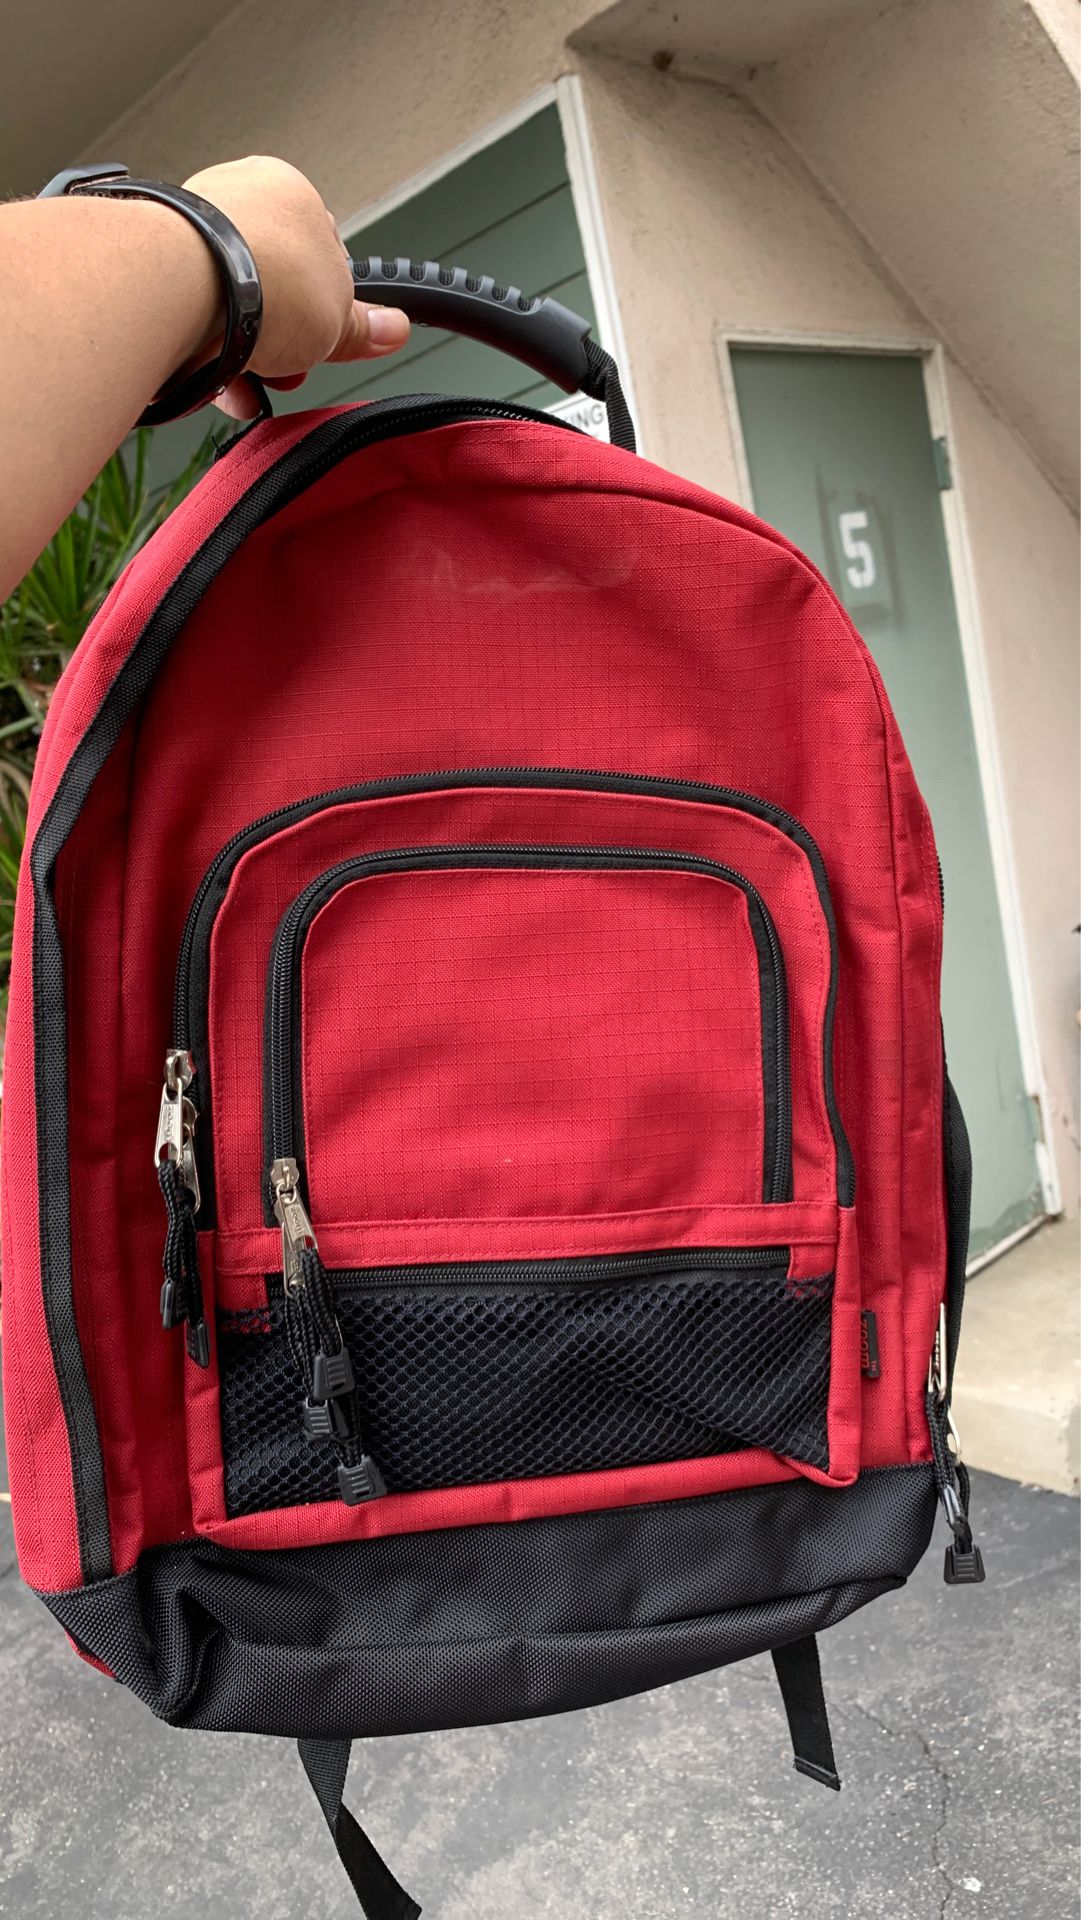 Laptop backpack 🎒 Brand new never used